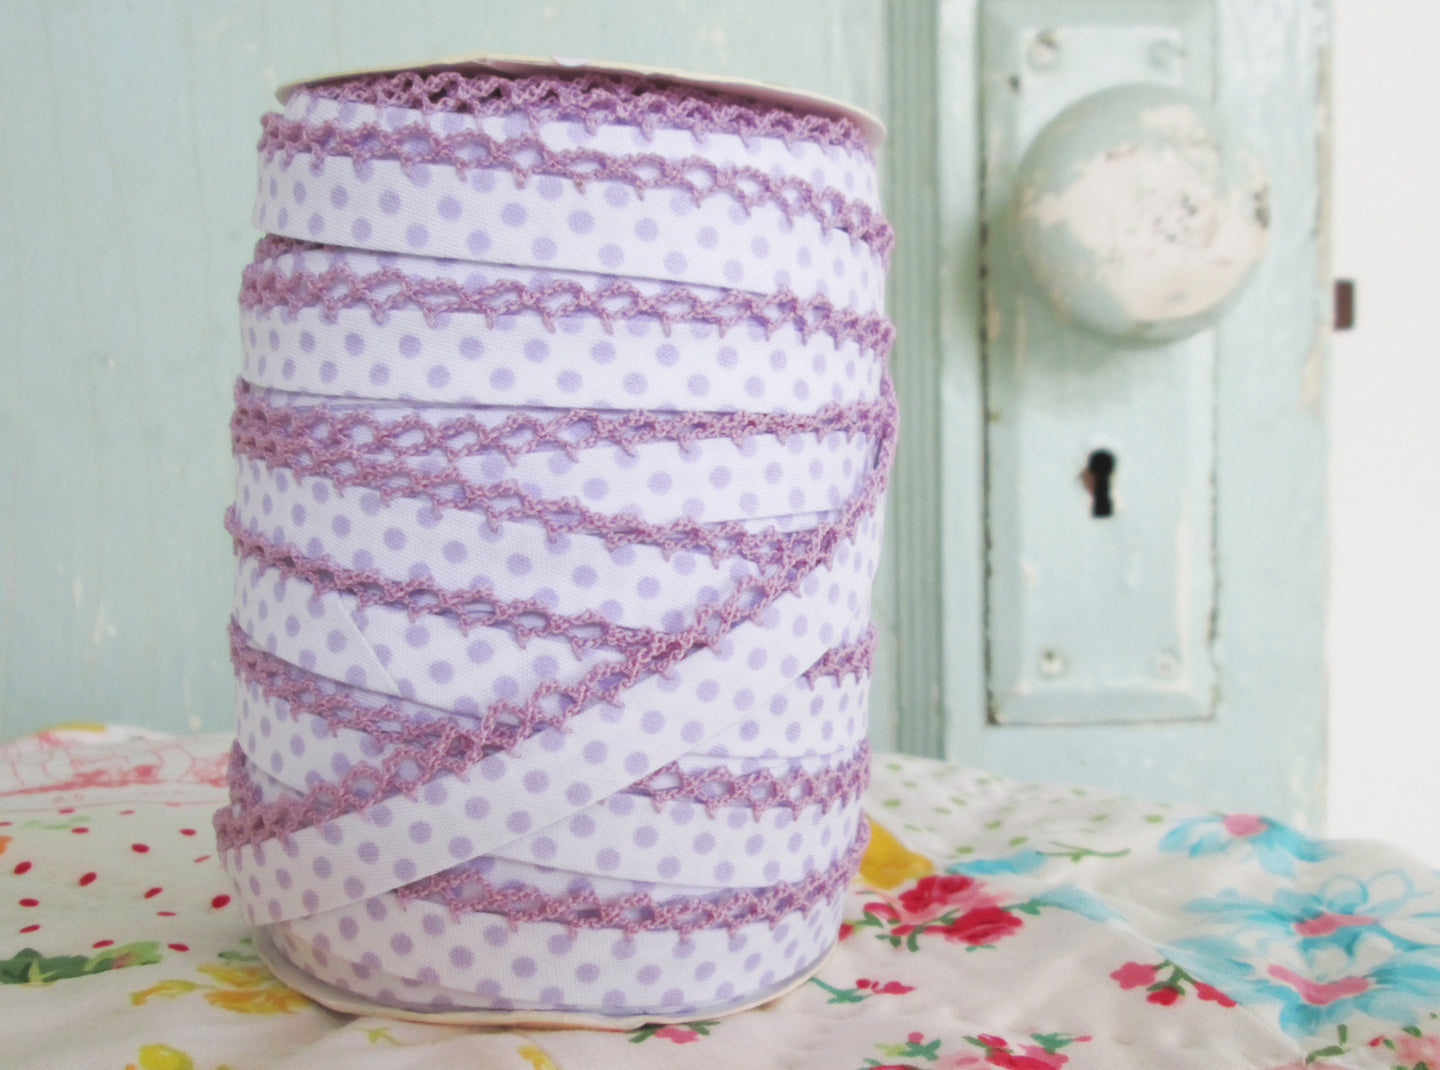 LACE BIAS TAPE, LAVENDER DOTS ON WHITE Double Fold Crochet Edge (BY THE YARD)